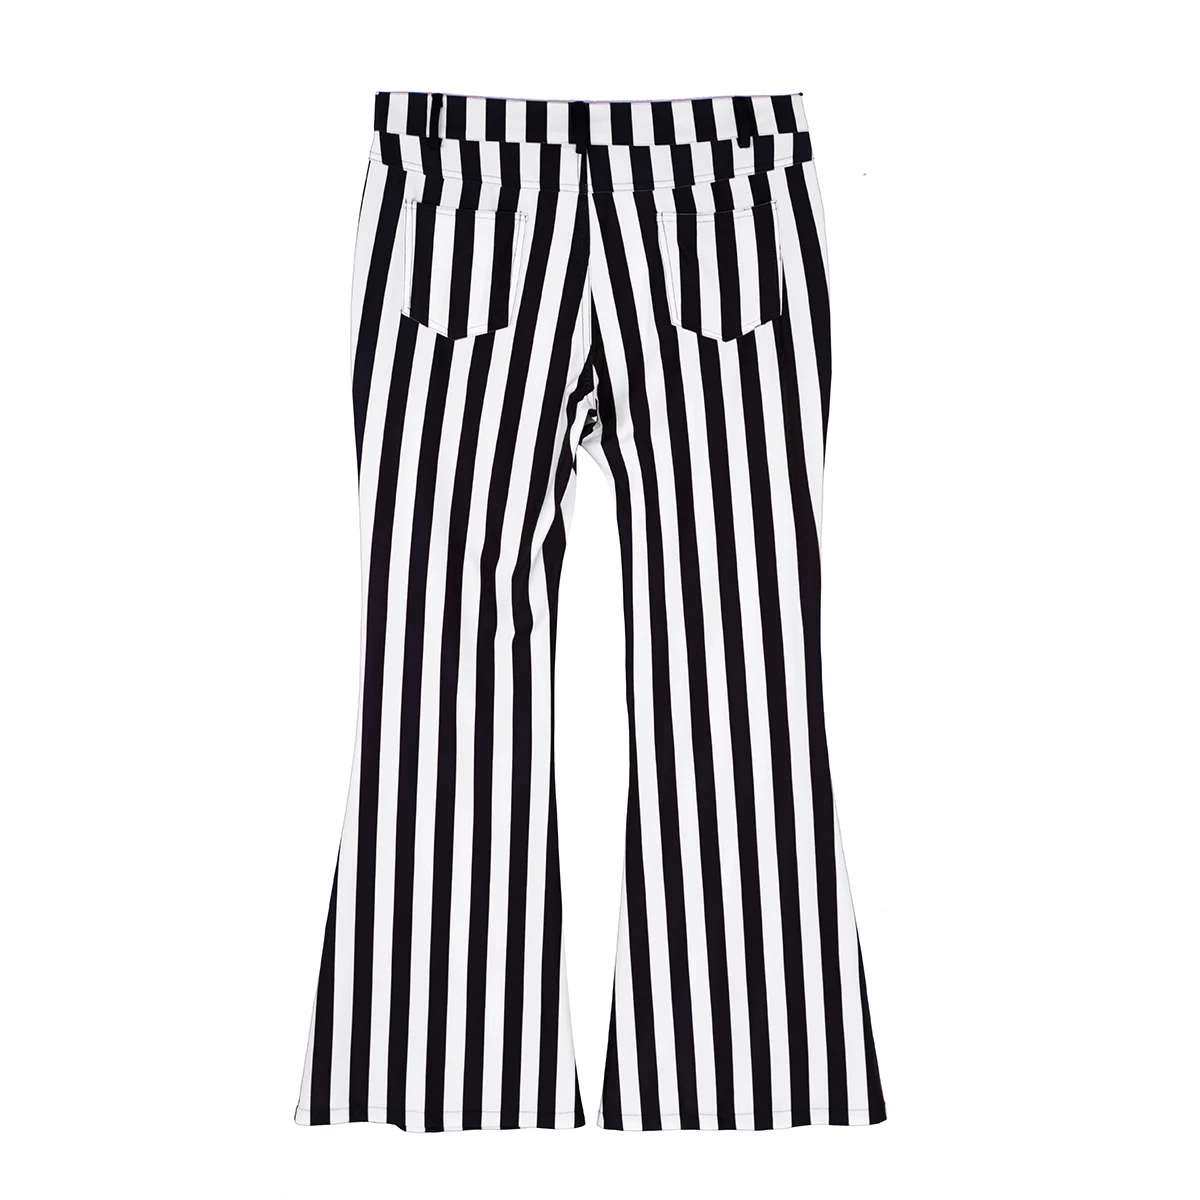 Adult Men Vintage Striped Long Pants Male Retro Mid Waist Elastic Flares Trousers Homme Party Stage Dance Costume Club Clothing